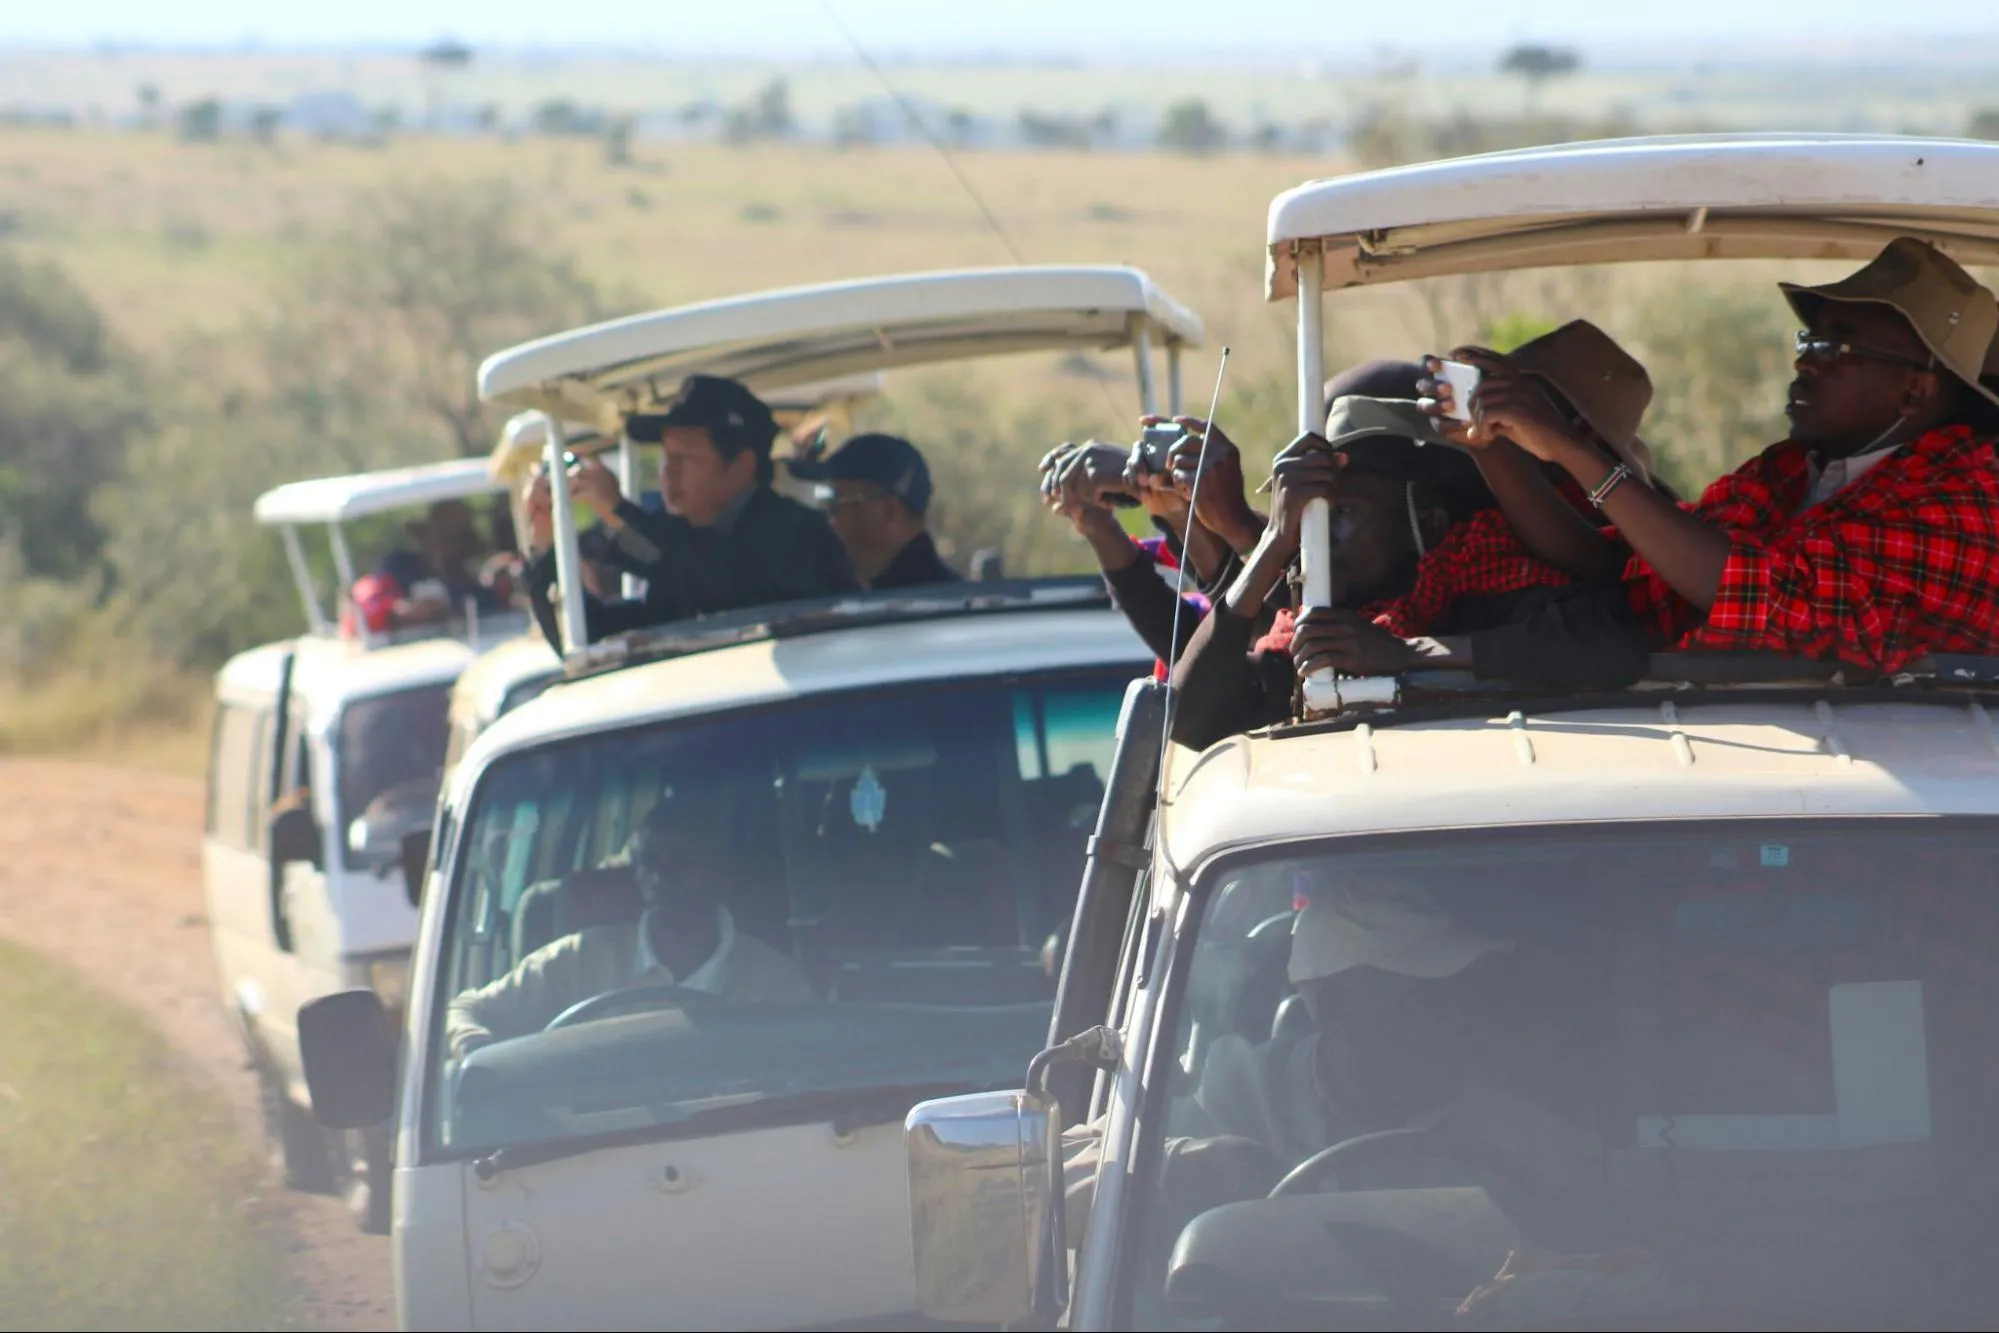 A diverse group of individuals enjoying an African jungle safari adventure in a vehicle